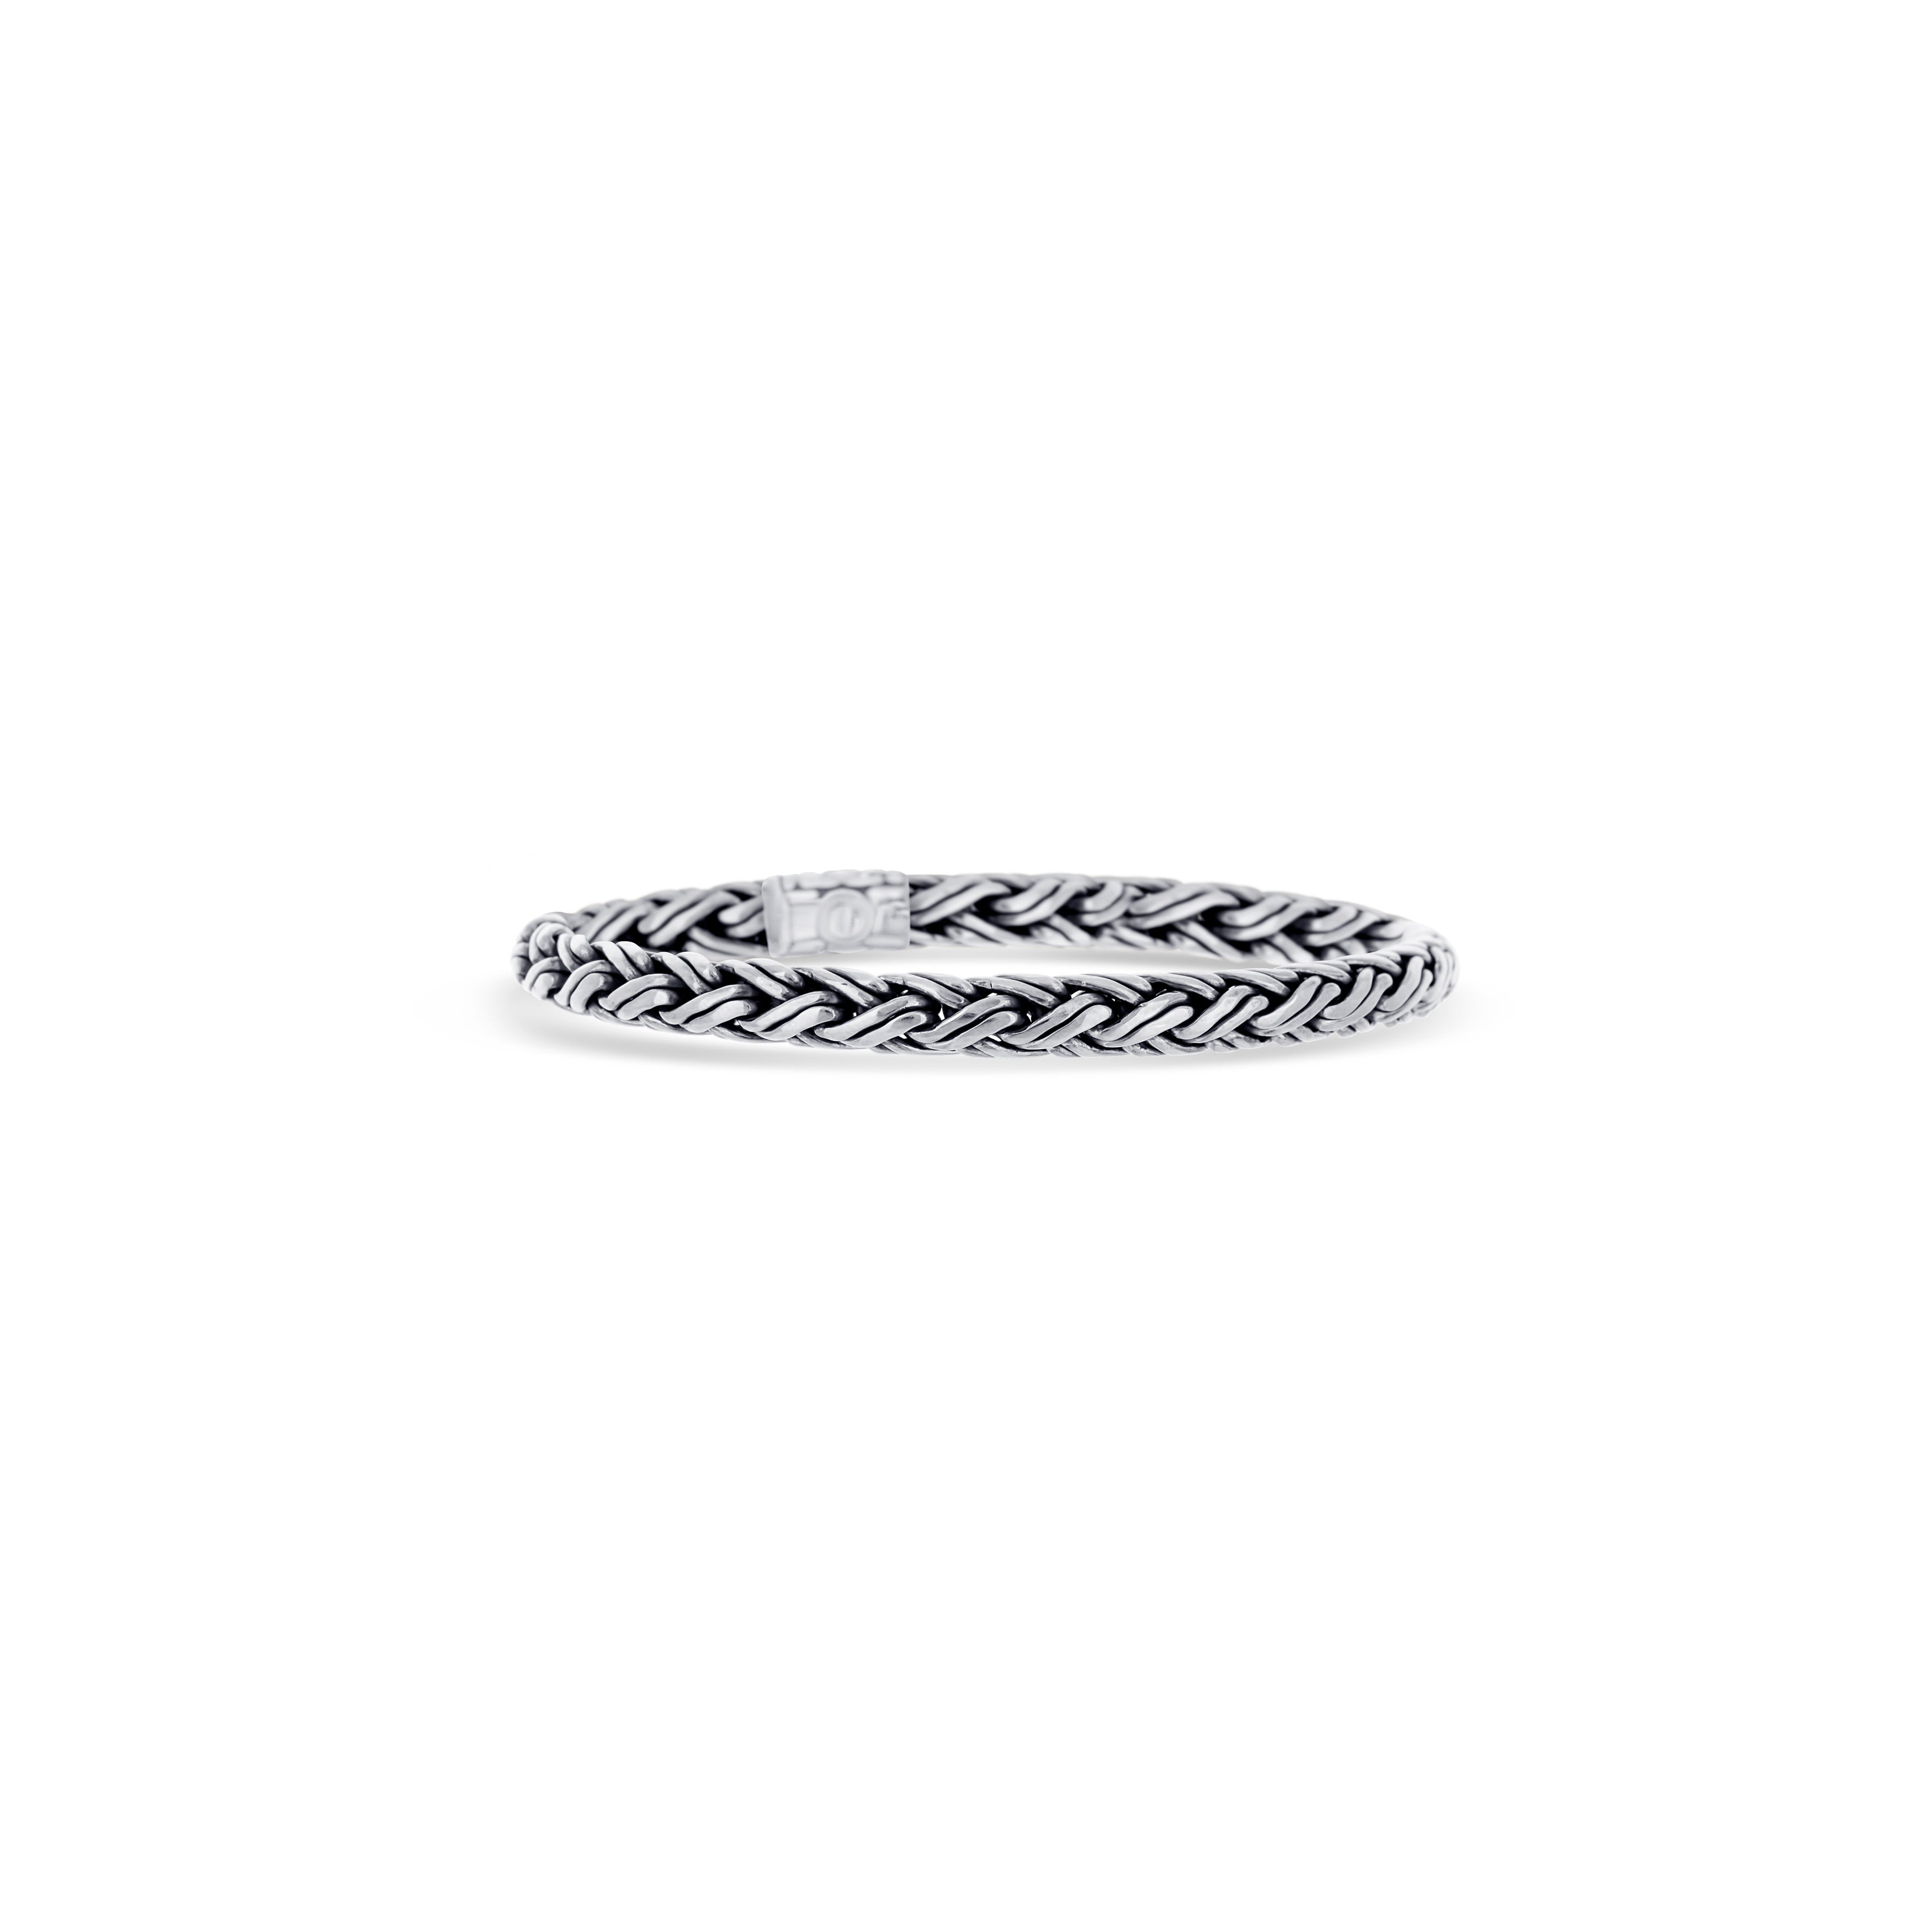 Sterling Silver Woven Bracelet With Black Spinel Clasp